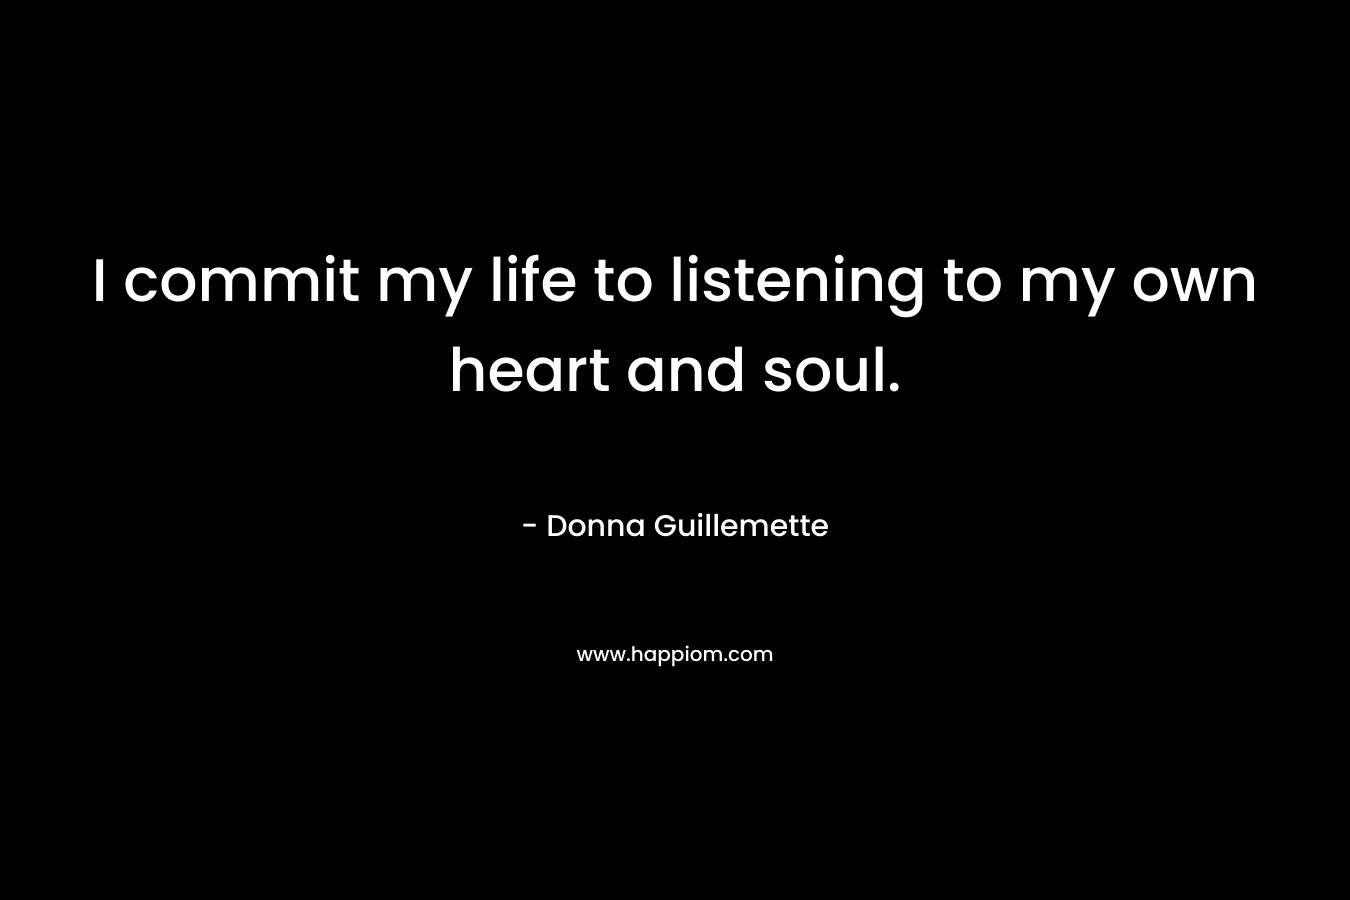 I commit my life to listening to my own heart and soul.